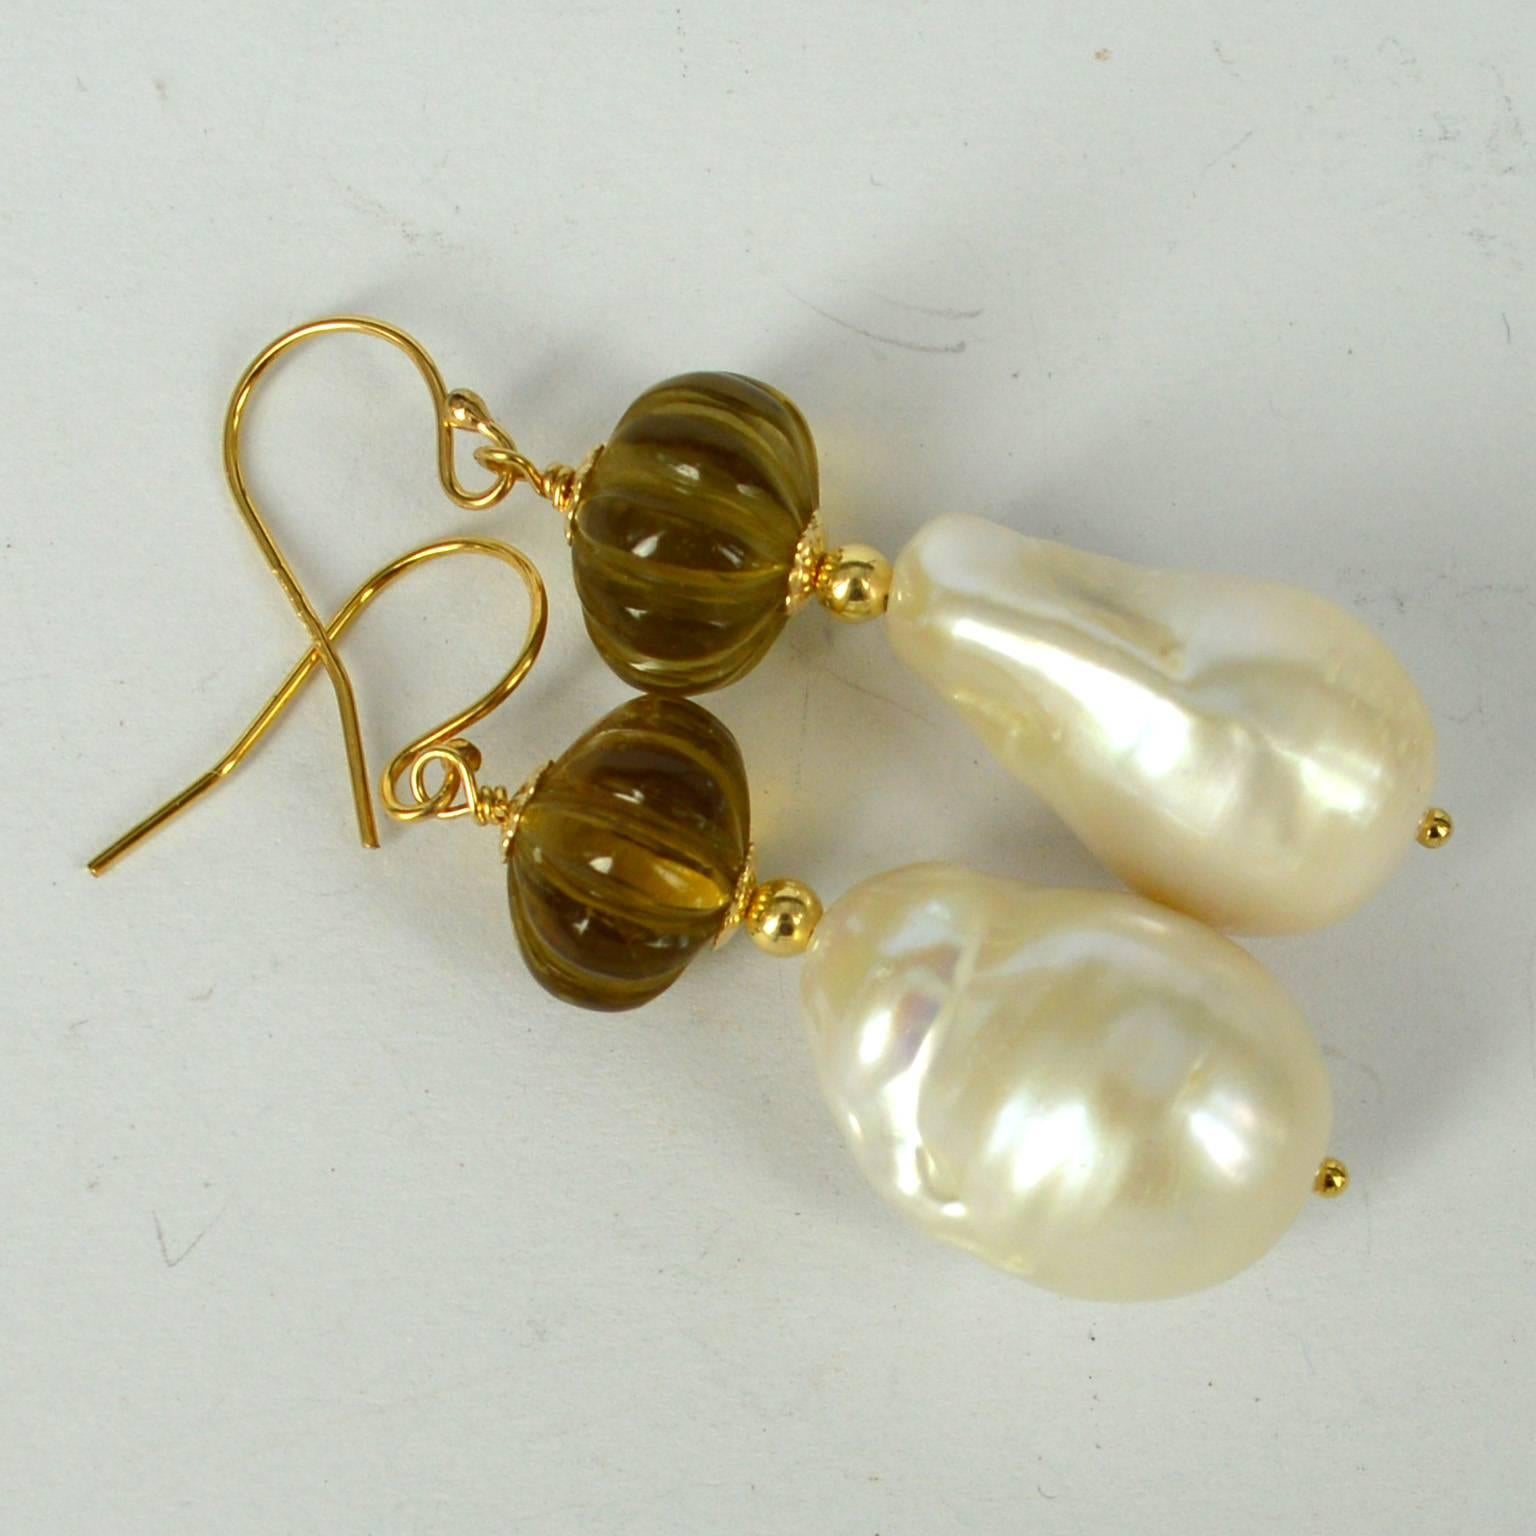 Stunning hand carved melon Shaped Beer Quartz with a high Quality Baroque Fresh Water Pearl.
Beer Quartz Beads measure 11x8mm with a 14x20mm Pearl.
All findings are 14k Gold Filled
length of Earrings is 47mm